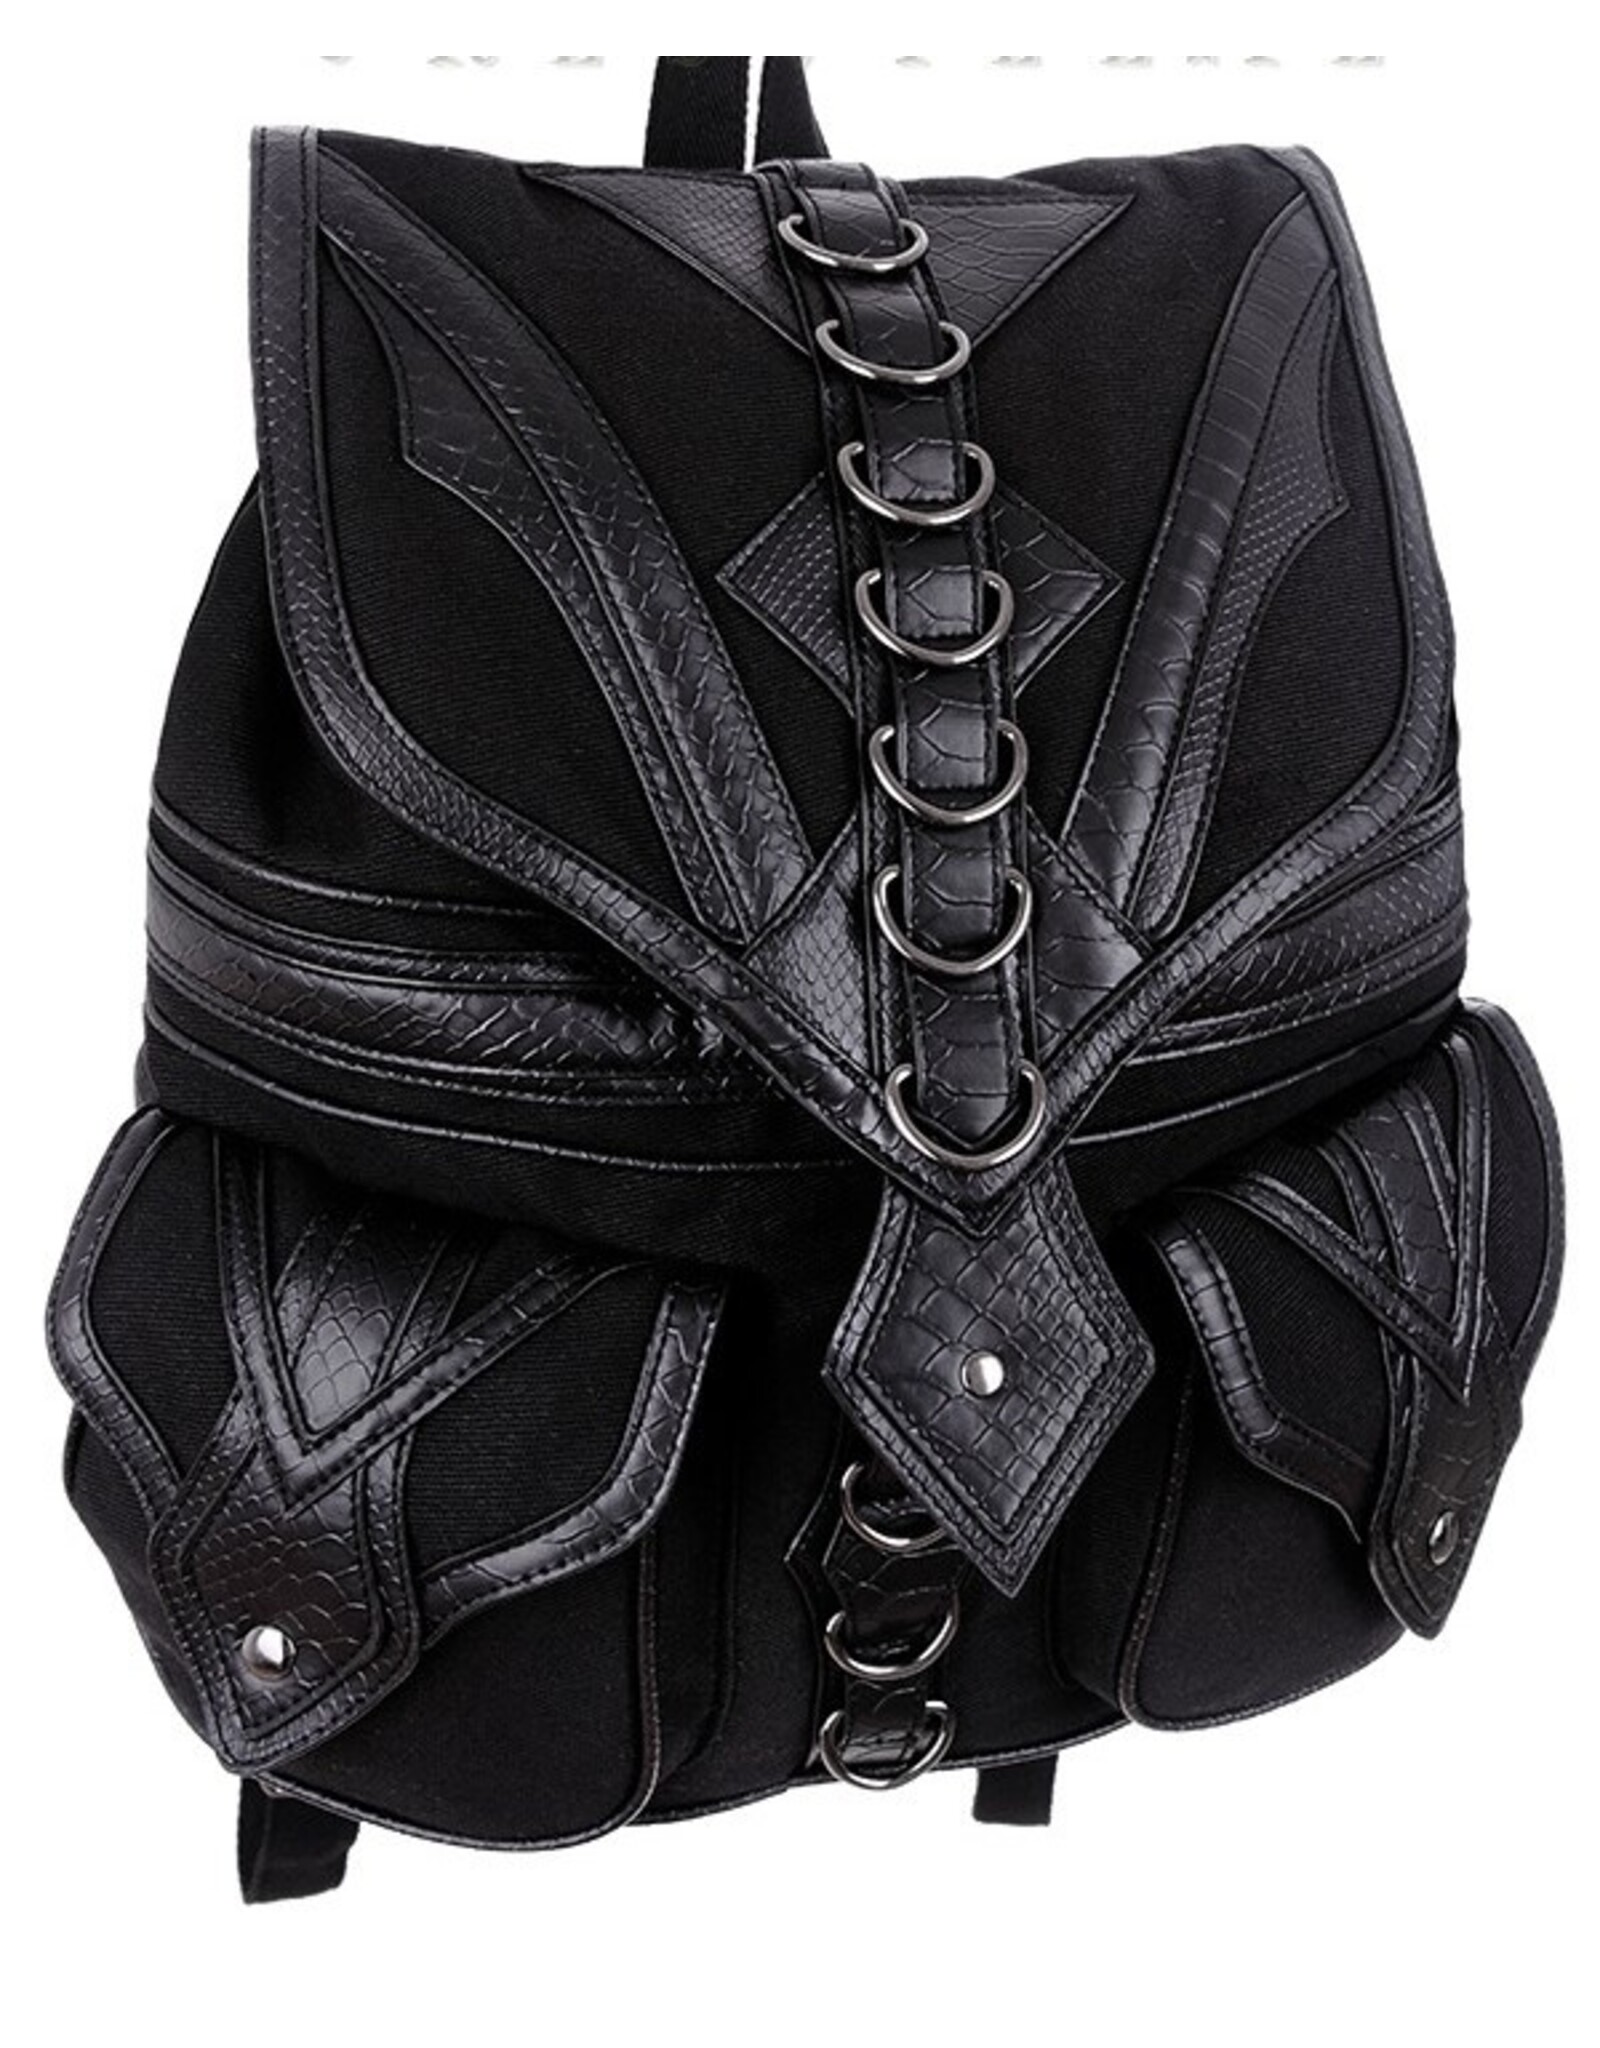 Restyle Gothic bags Steampunk bags - Dragon Backpack Restyle